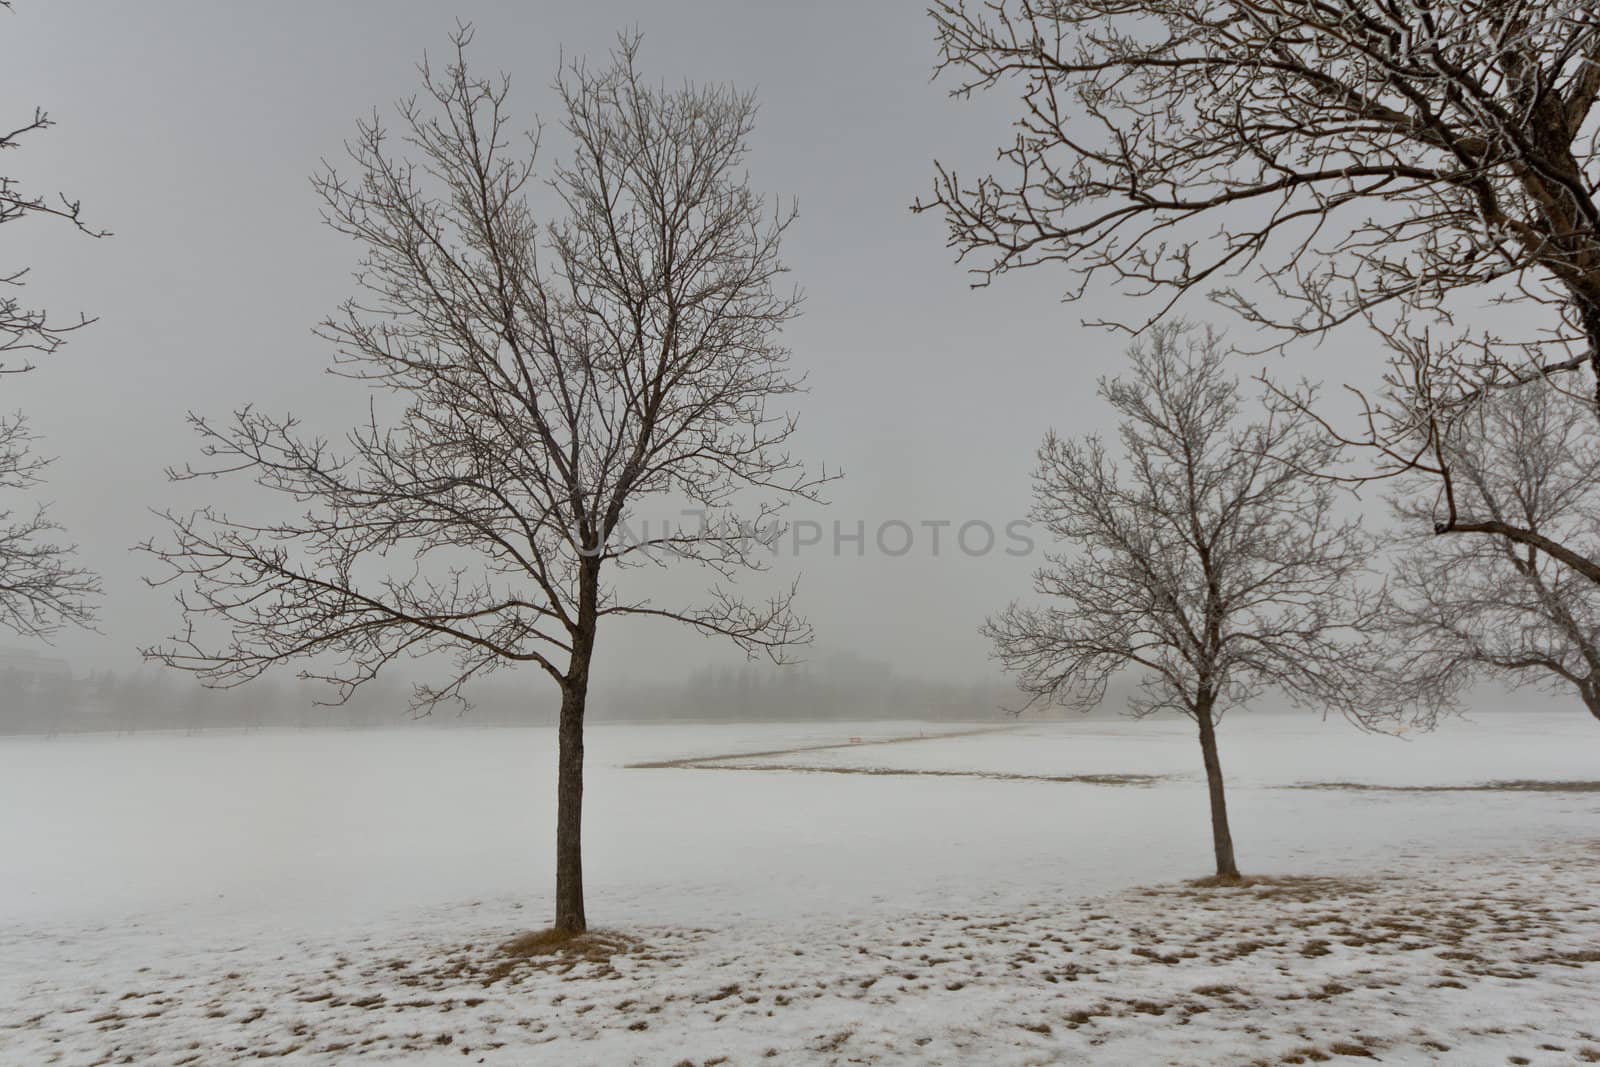 Trees on a foggy day  by derejeb